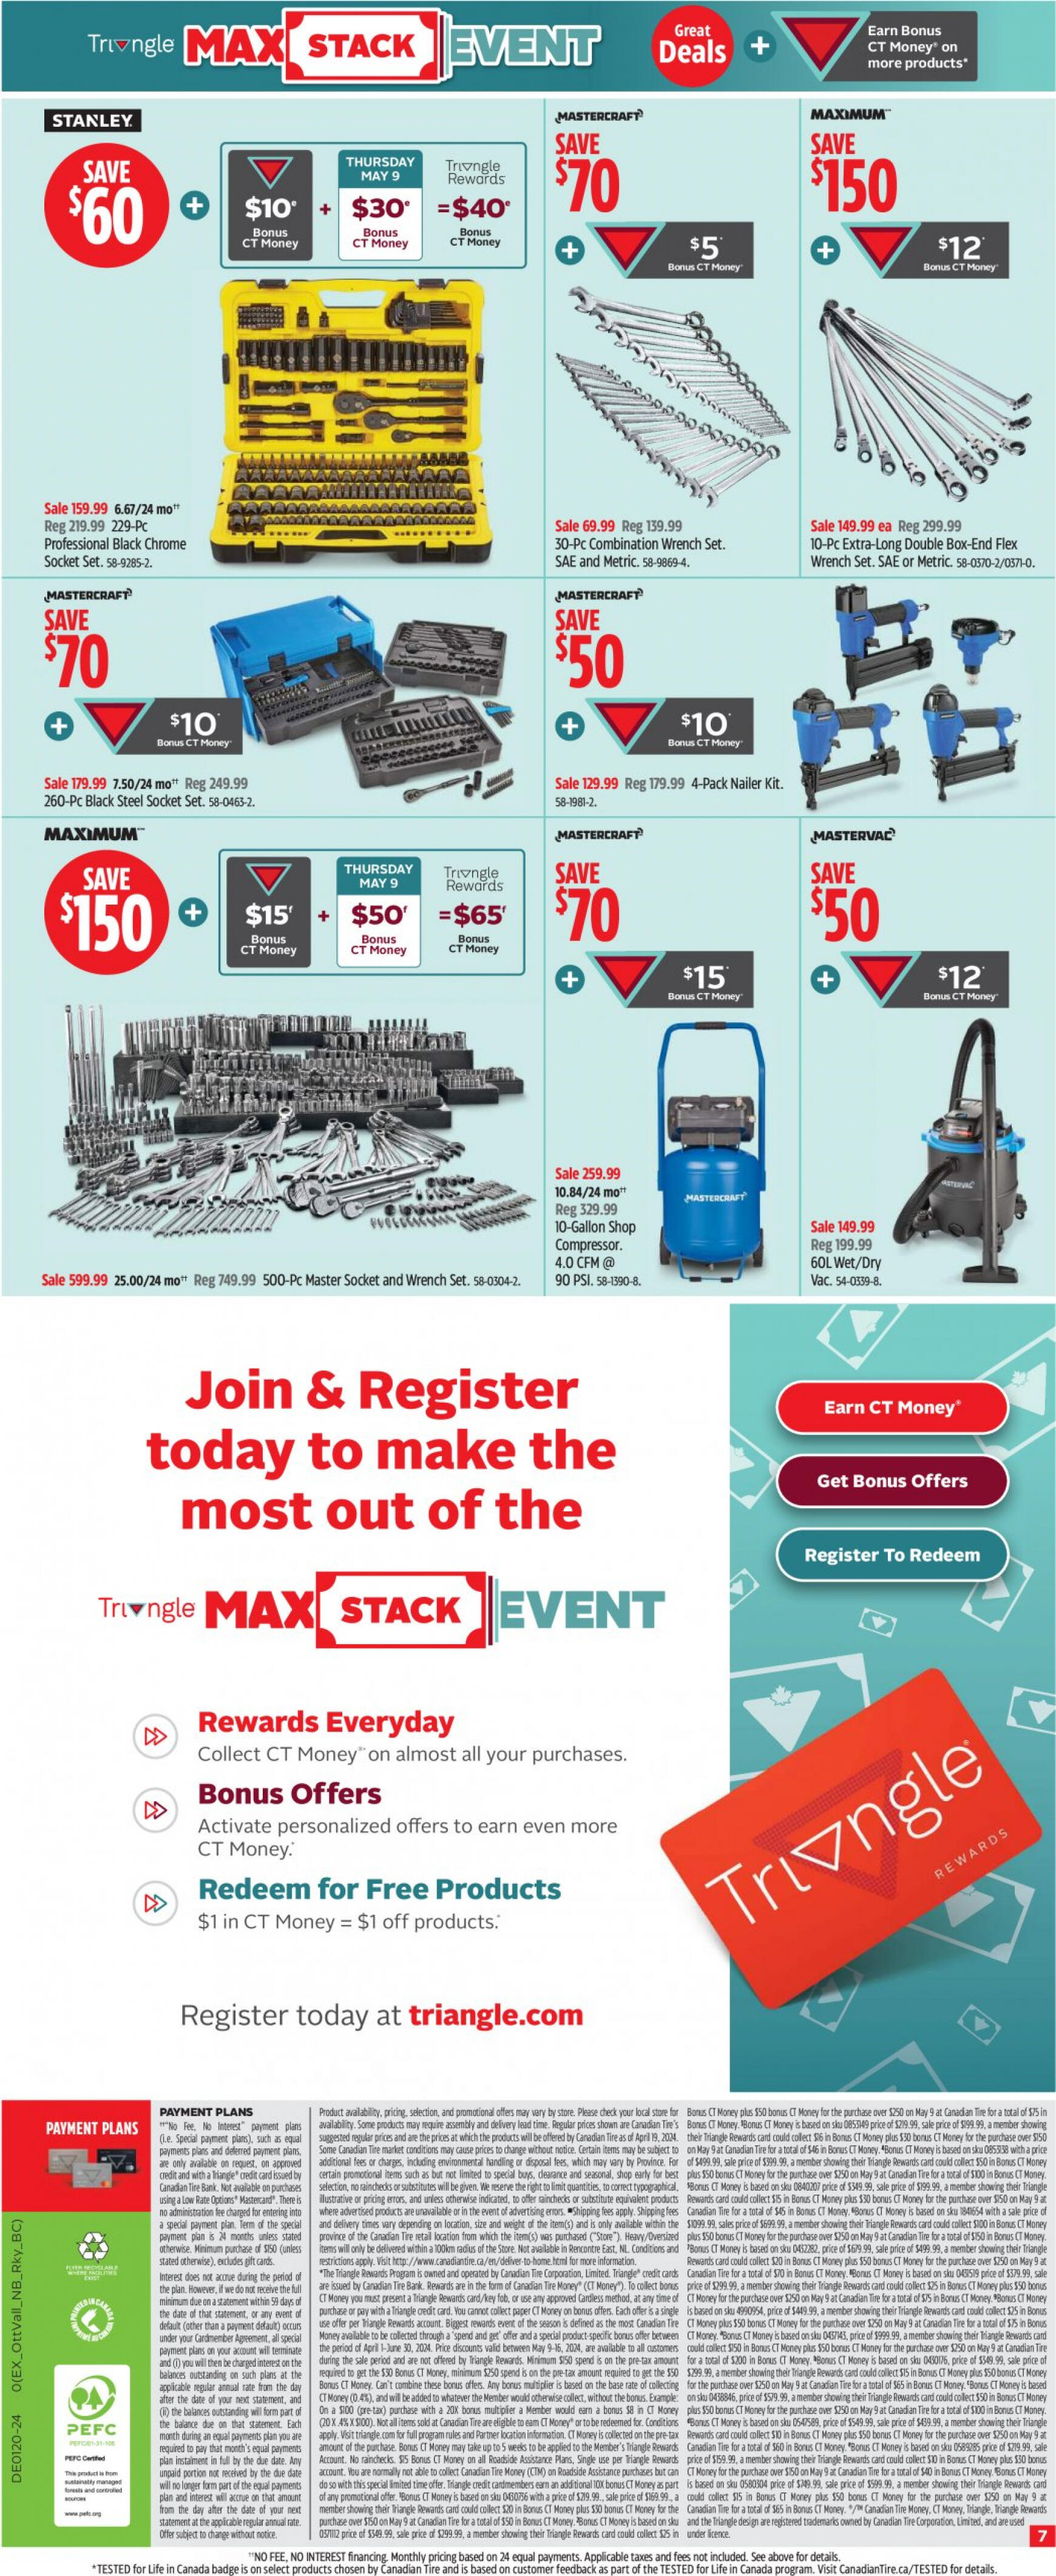 canadian-tire - Canadian Tire flyer current 09.05. - 15.05. - page: 7